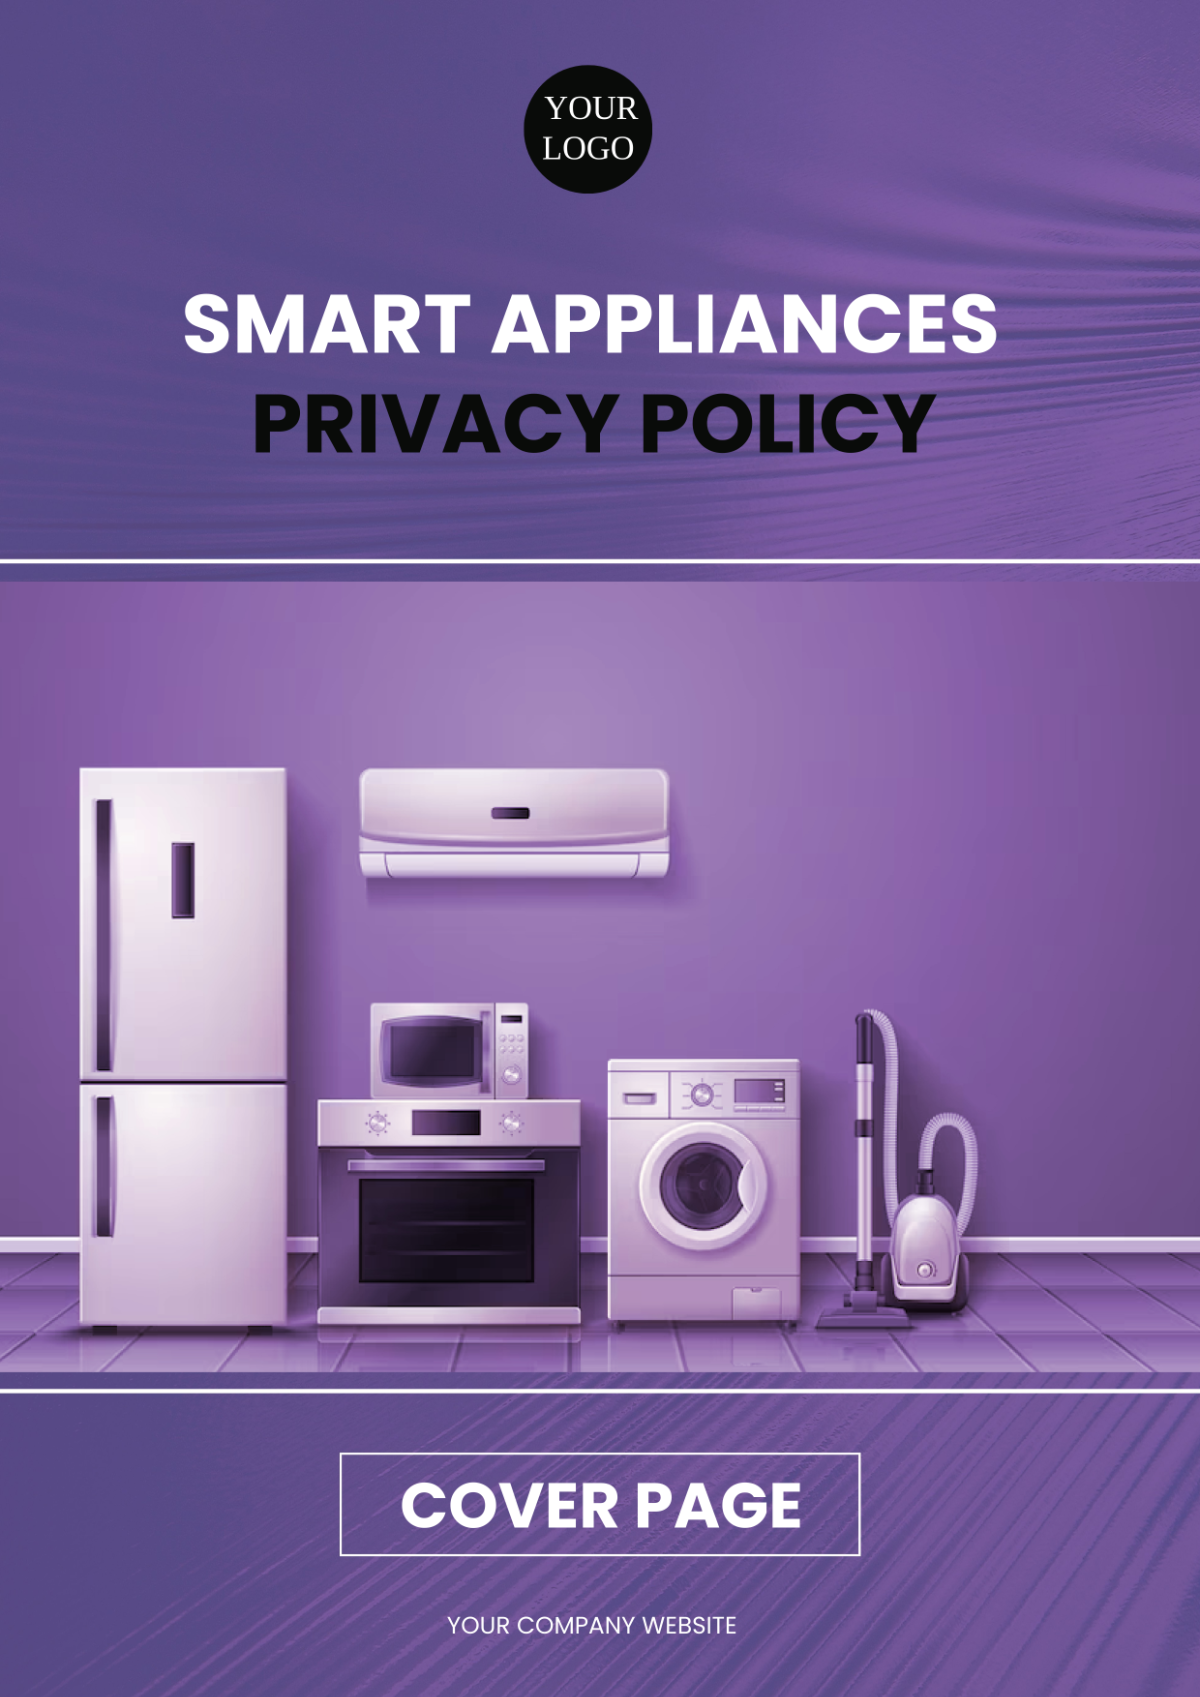 Smart Appliances Privacy Policy Cover Page